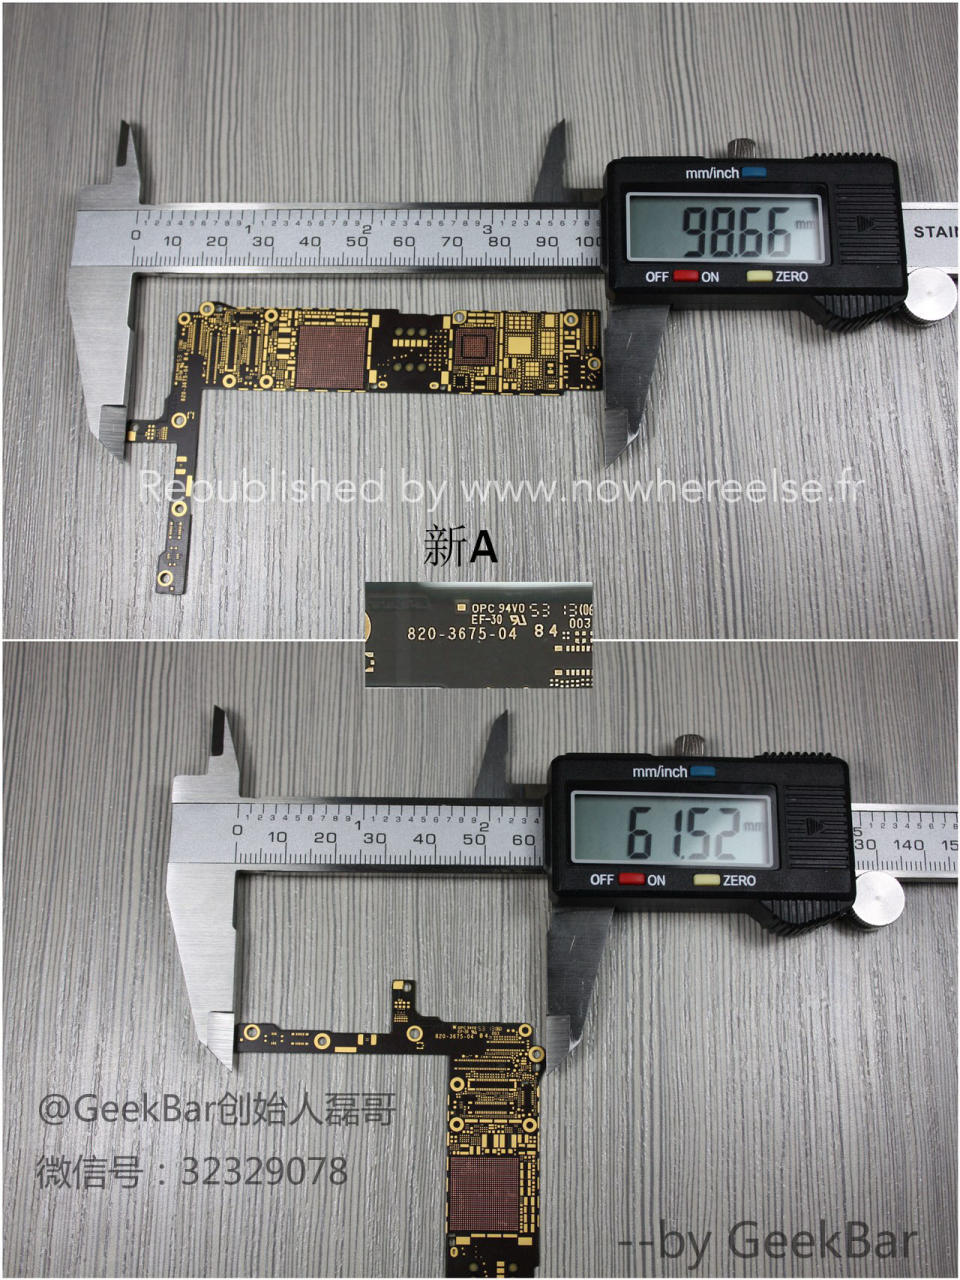 New leak compares key component from iPhone 6 and ‘iPhone Air’ phablet